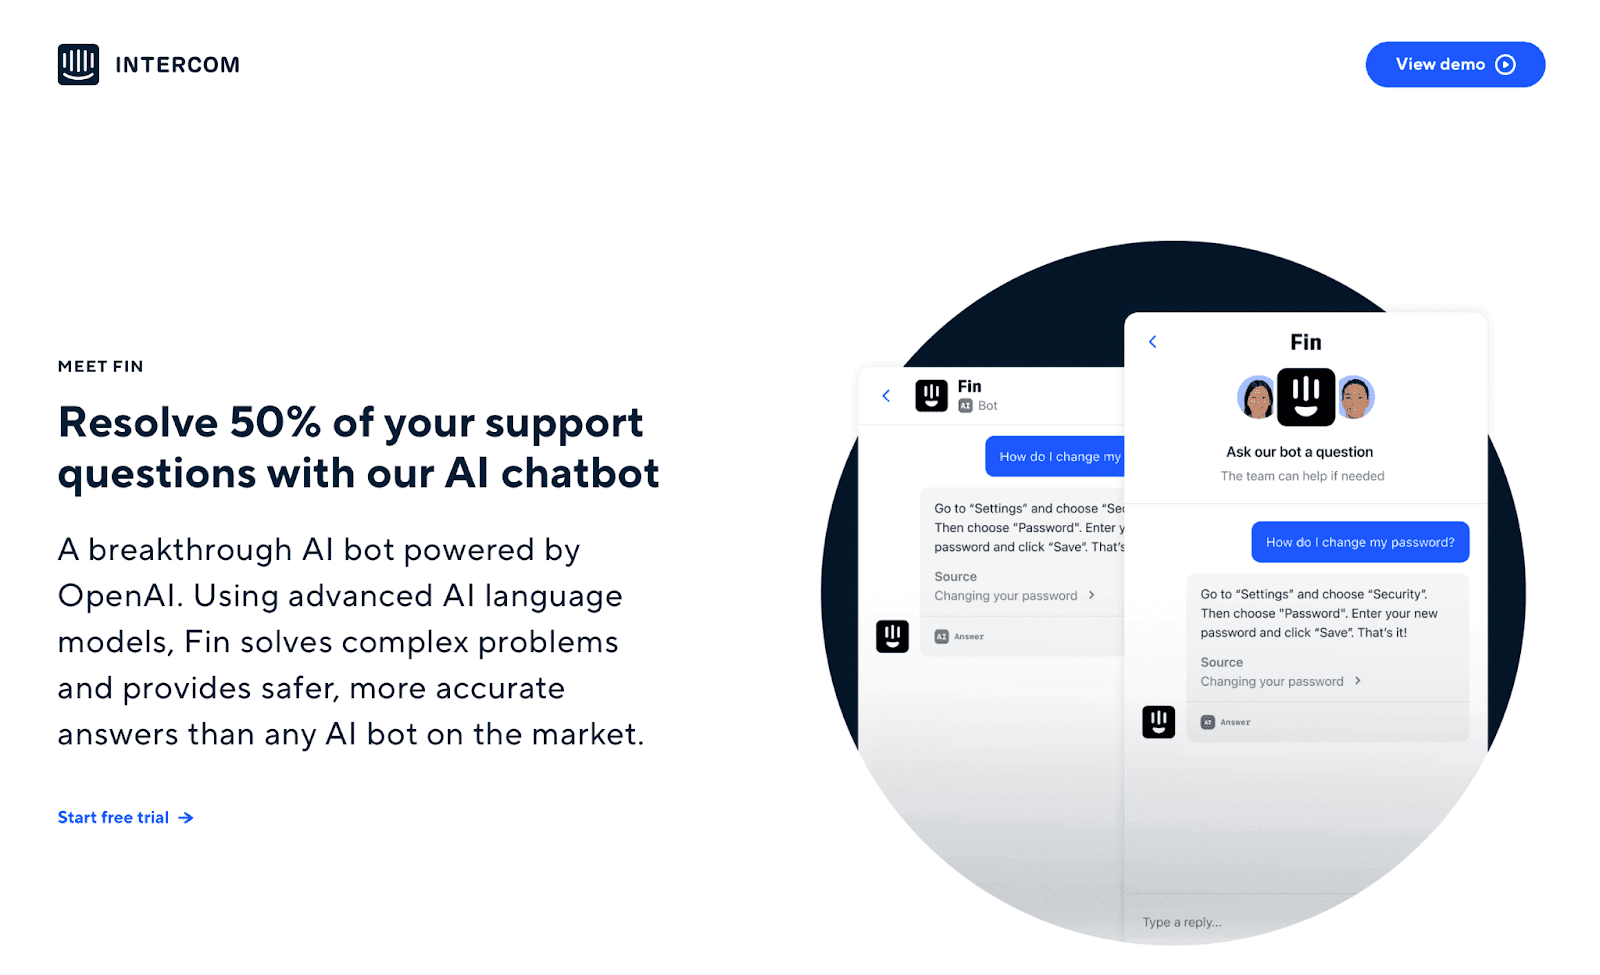 Intercom website - Resolve 50% of your support questions with our AI chatbot